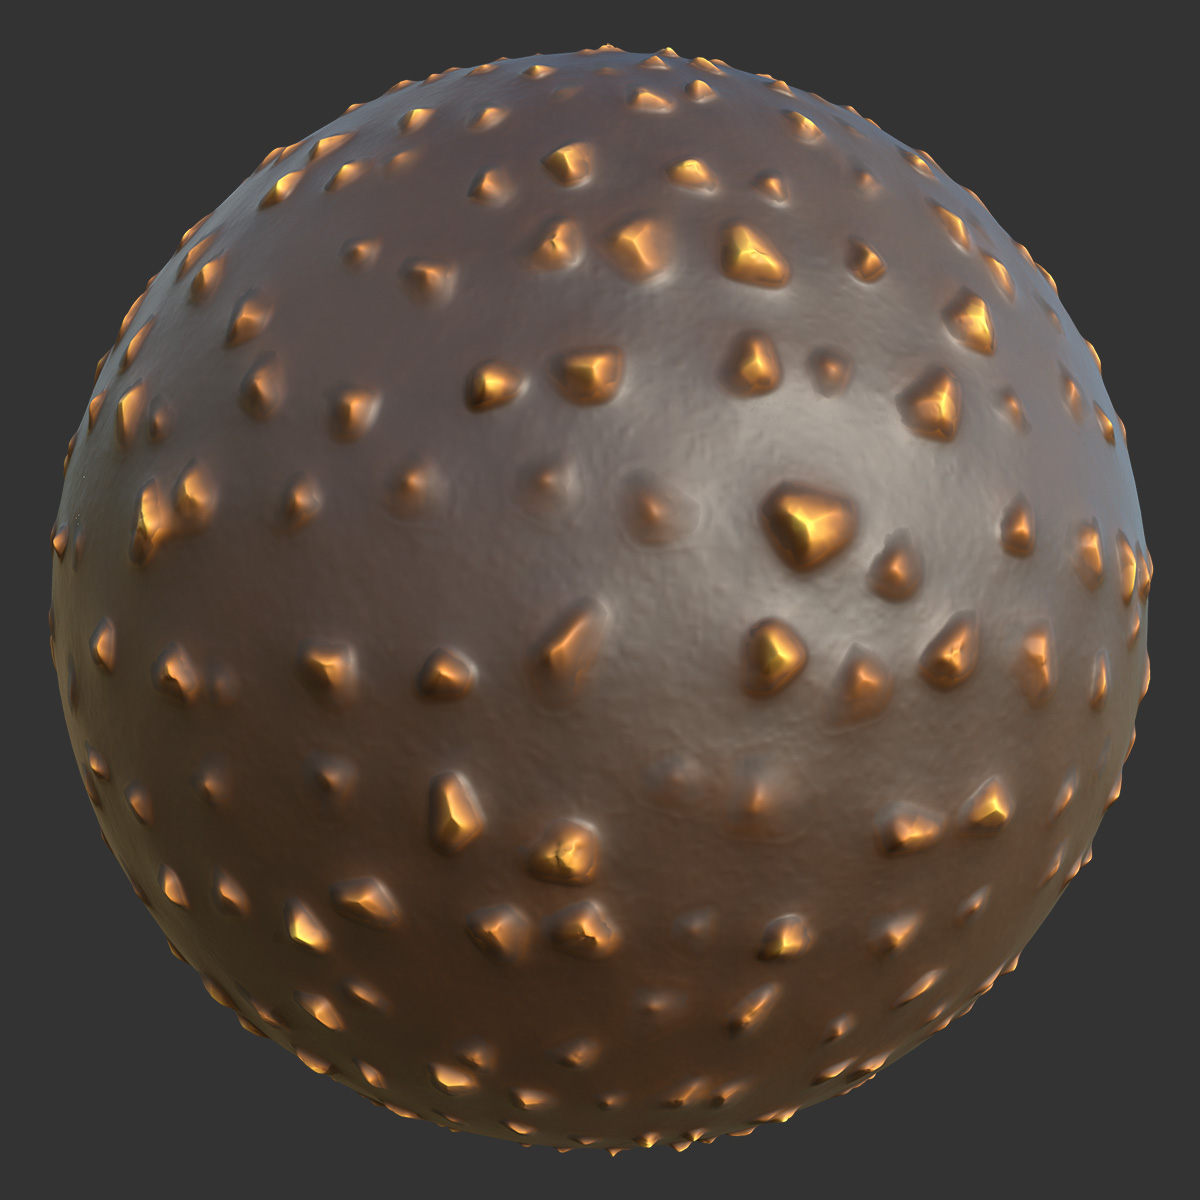 Free Pbr Textures For Blender 26 Free Pbr Textures Fo - vrogue.co